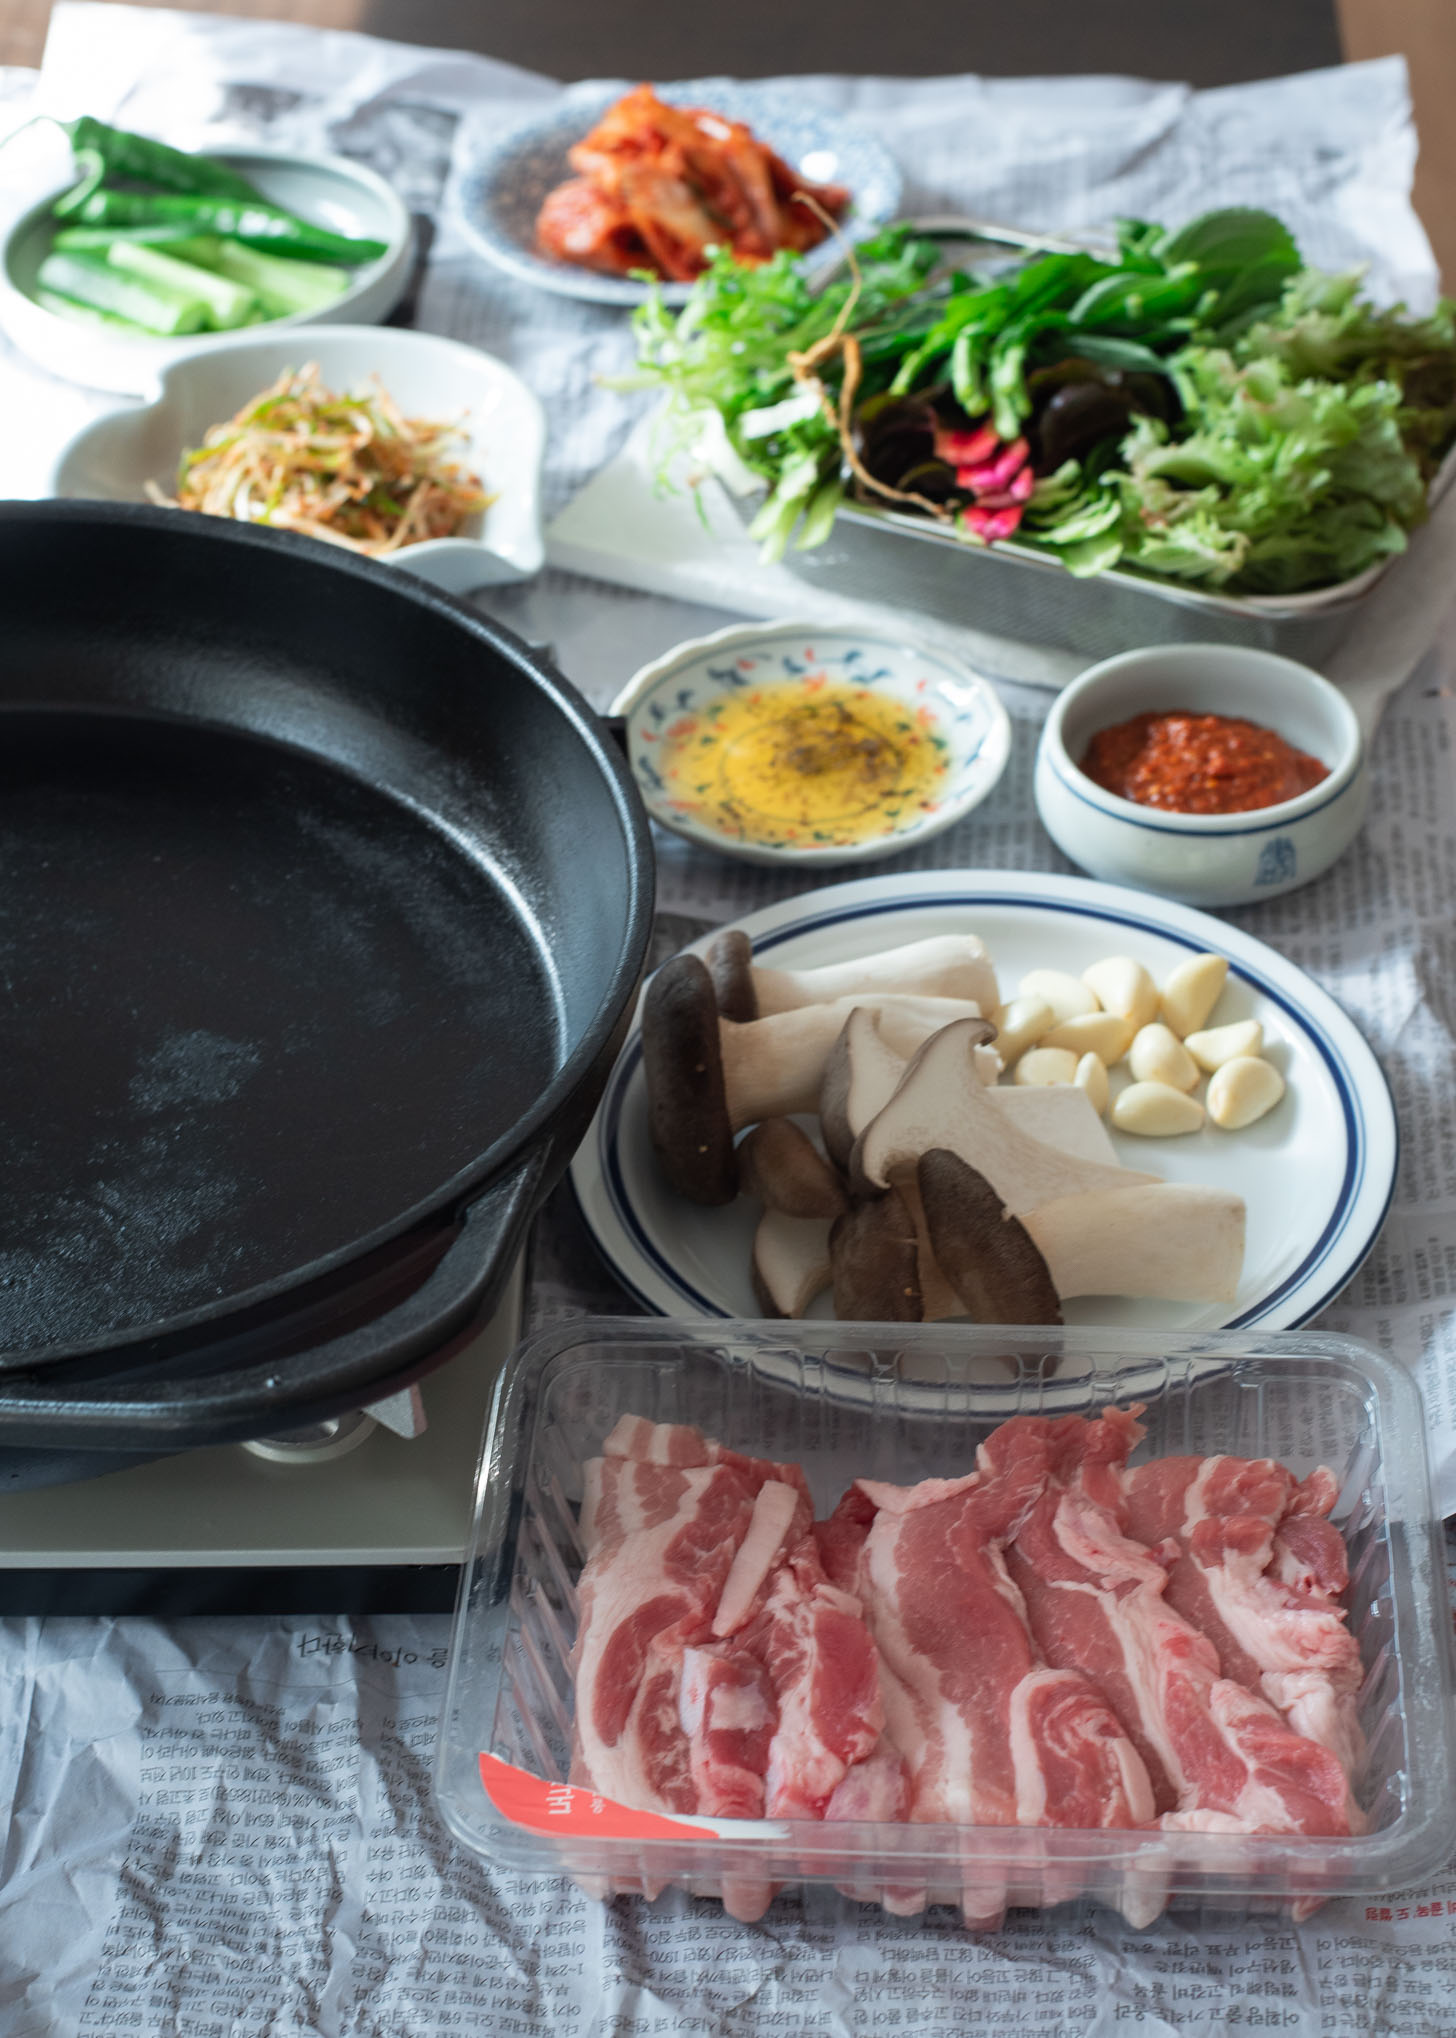 A large grill pan is placed on a table along with pork belly and side dishes around.